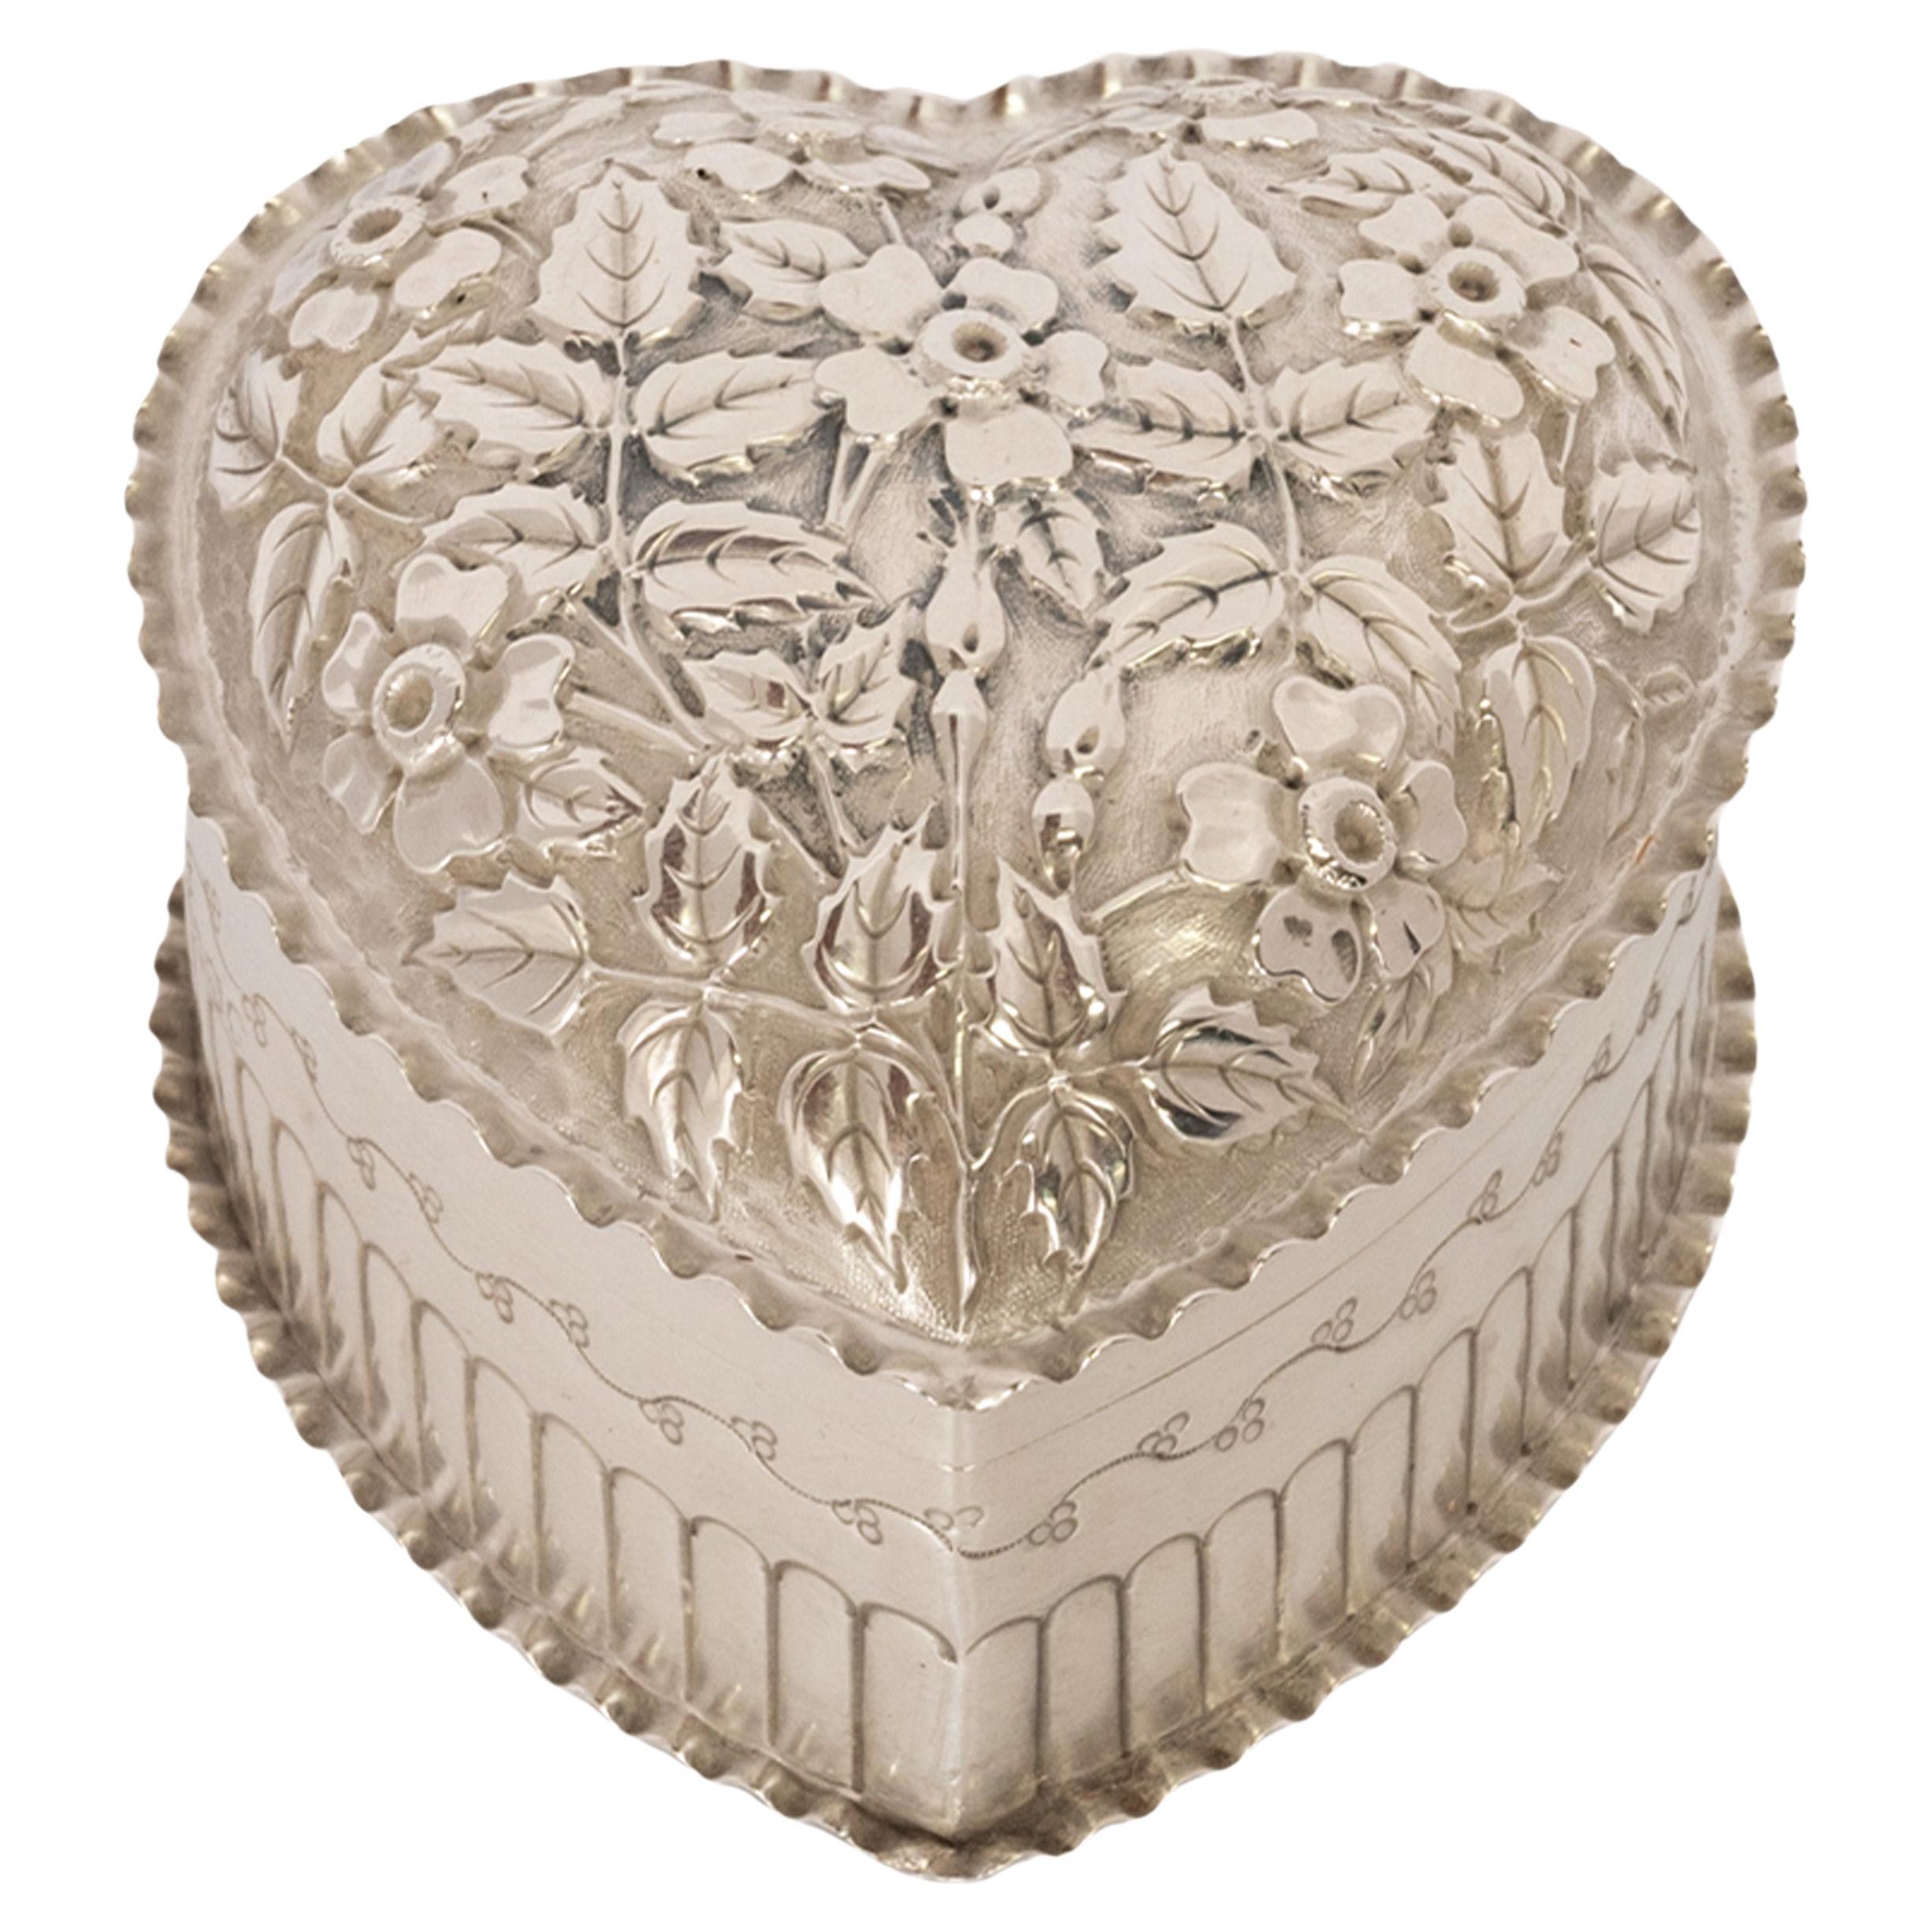 Antique Sterling Silver Repousse Heart Trinket Jewelry Box William Hutton London For Sale